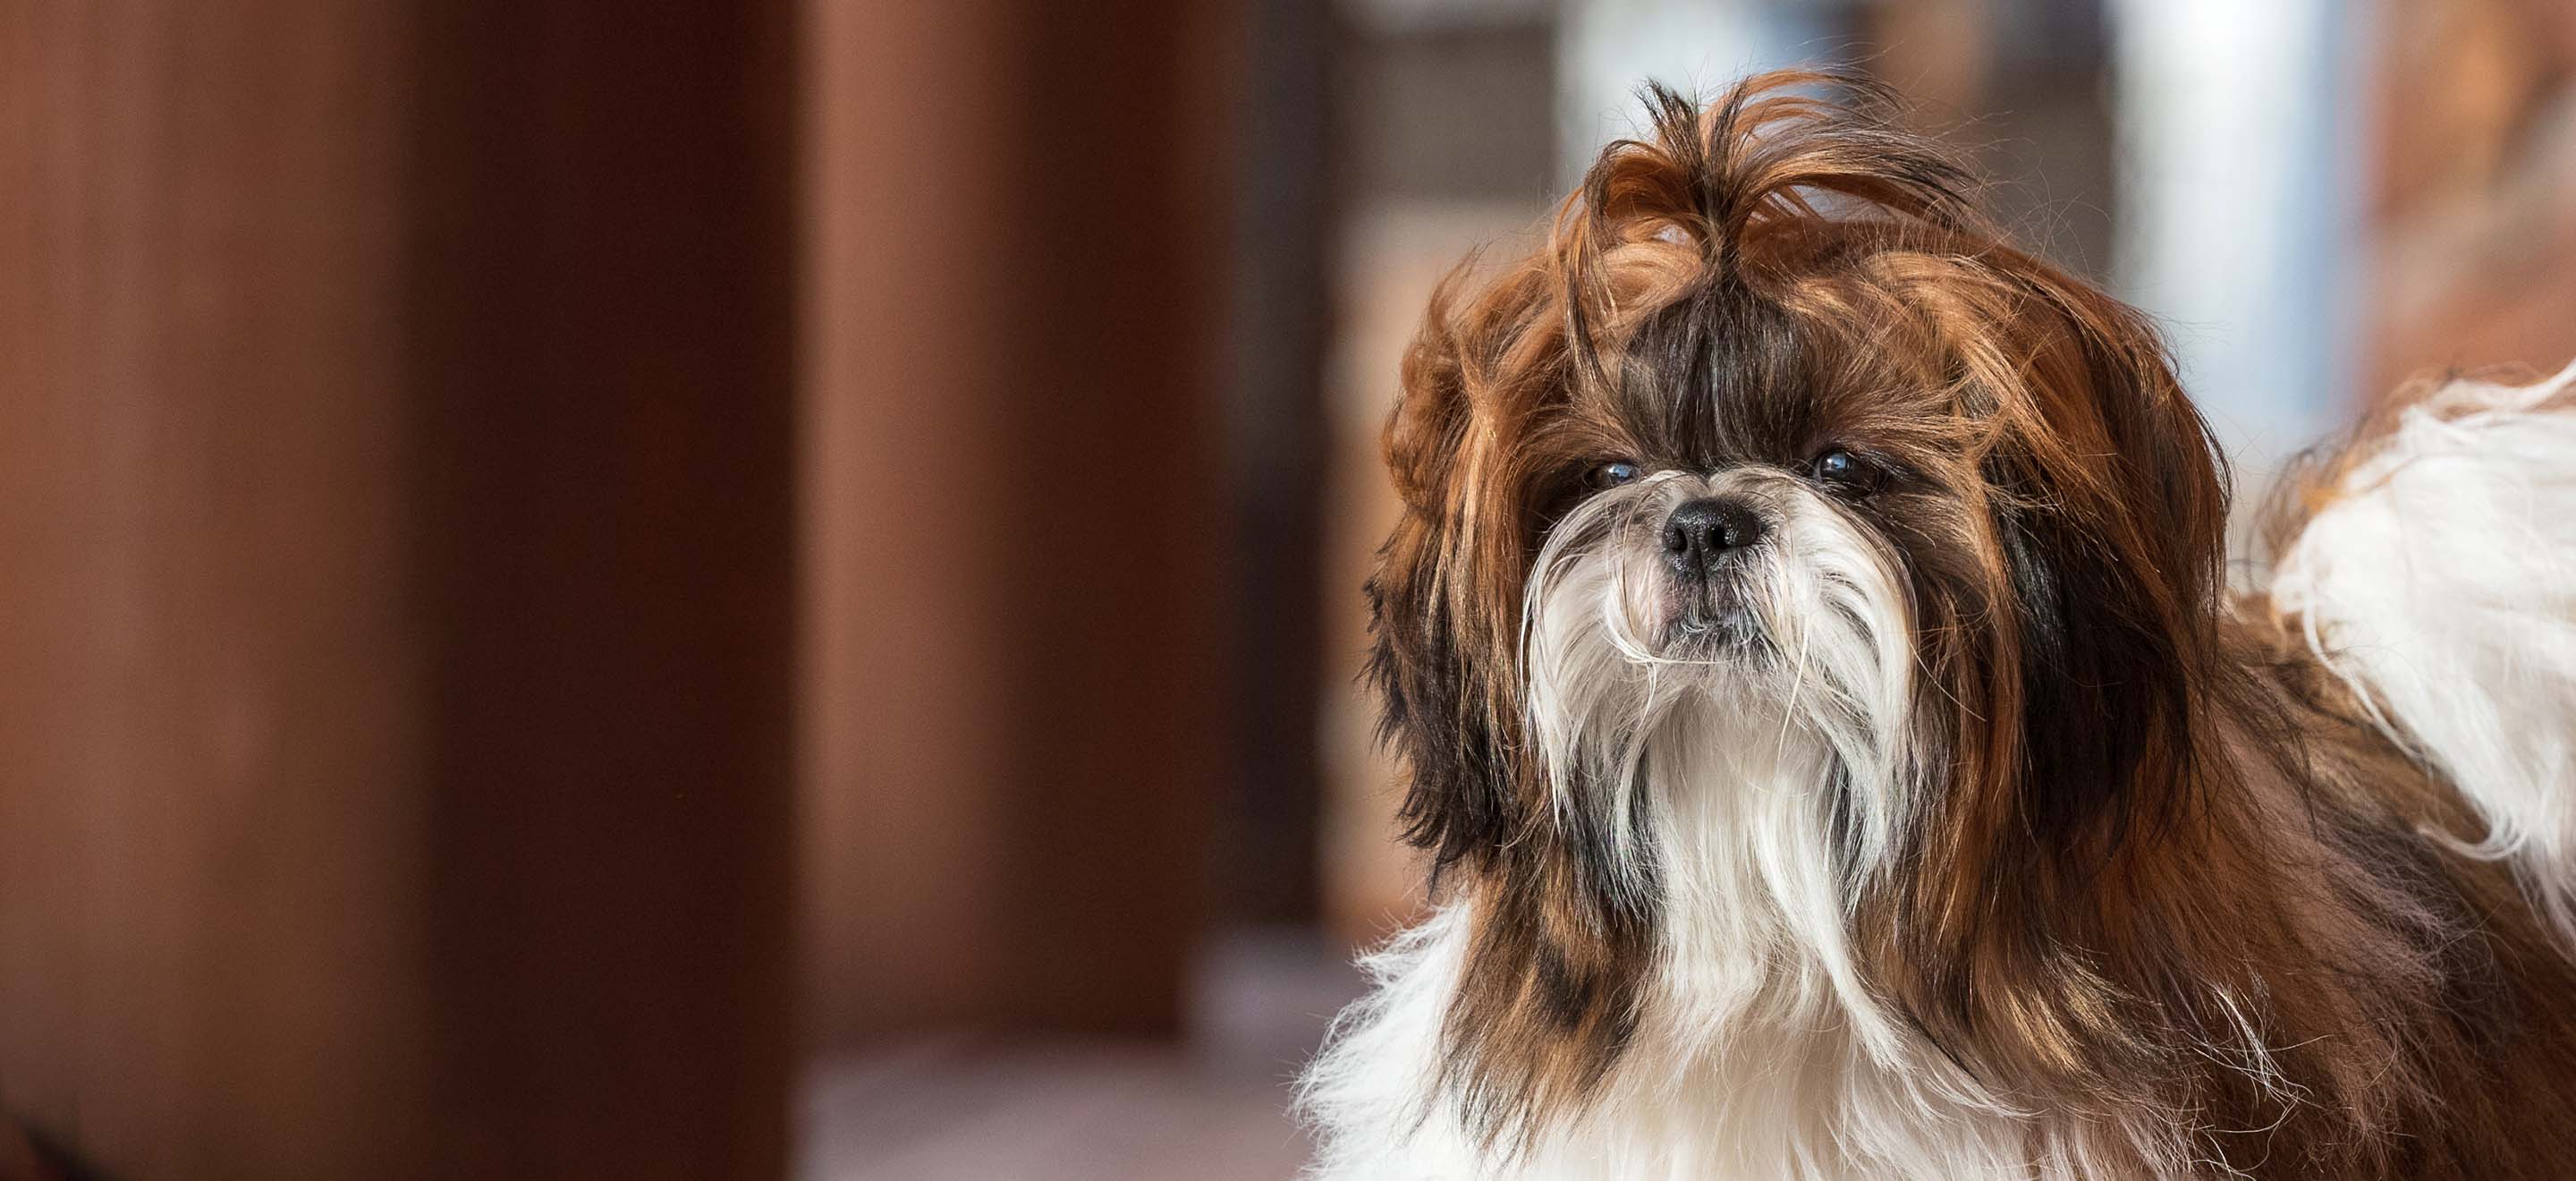 White, black and brown Shih Tzu dog standing between brown columns outside image